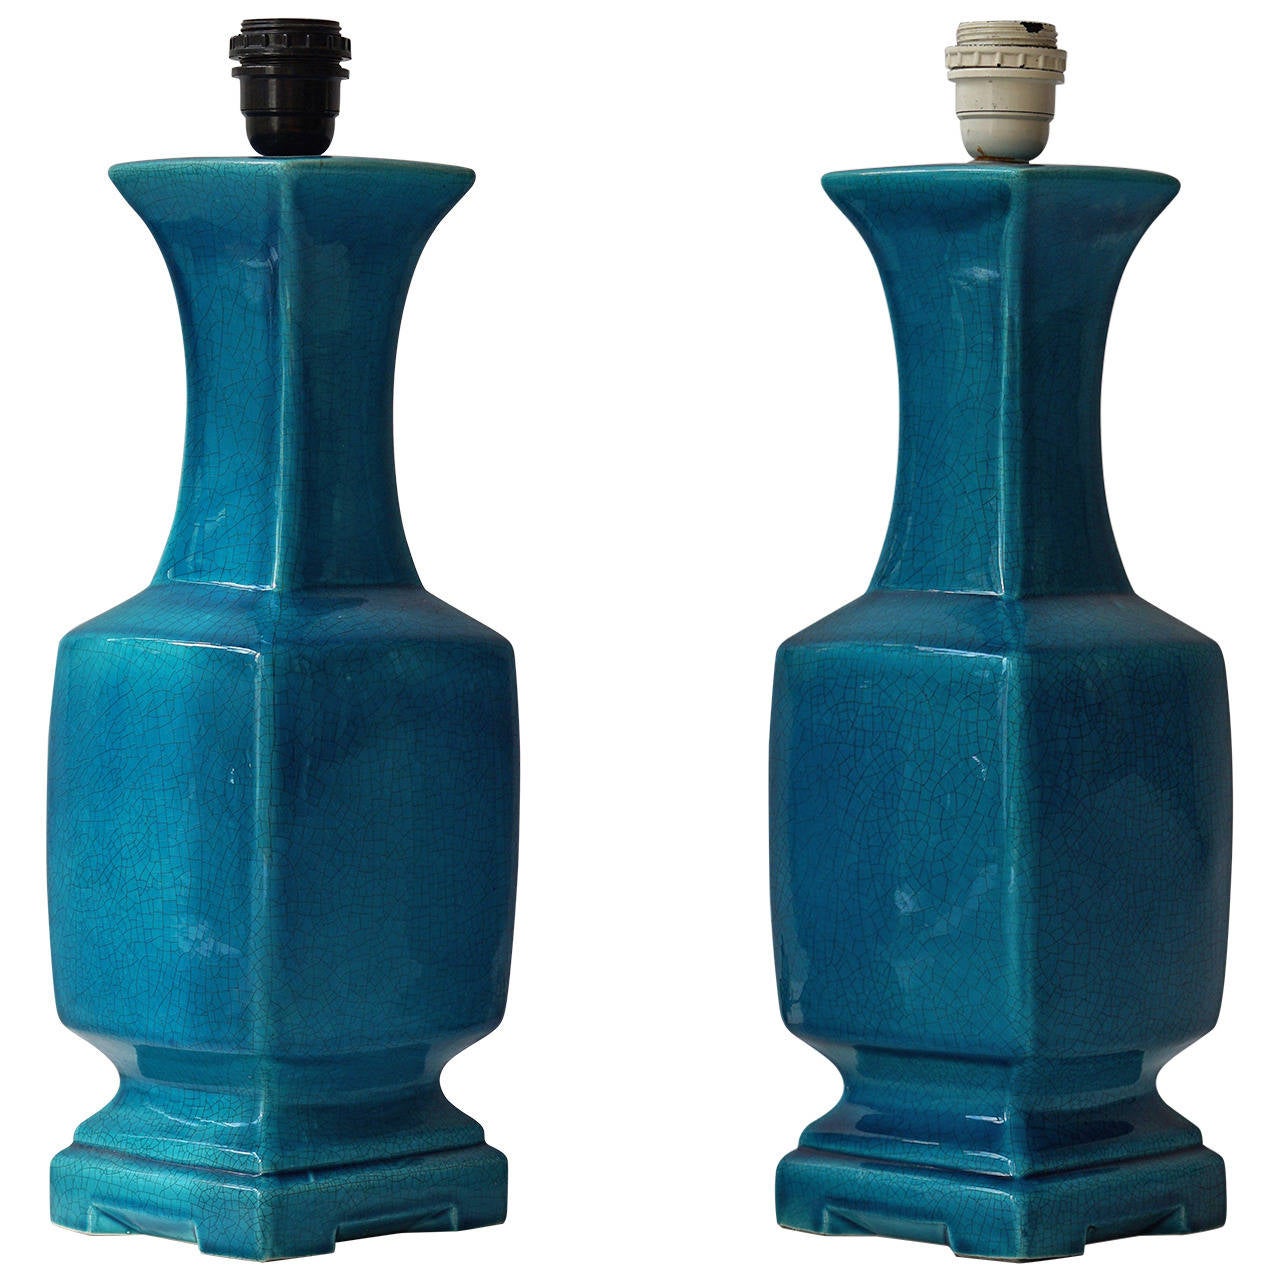 Charming pair of table lamps in the manner of Bitossi, Italy.